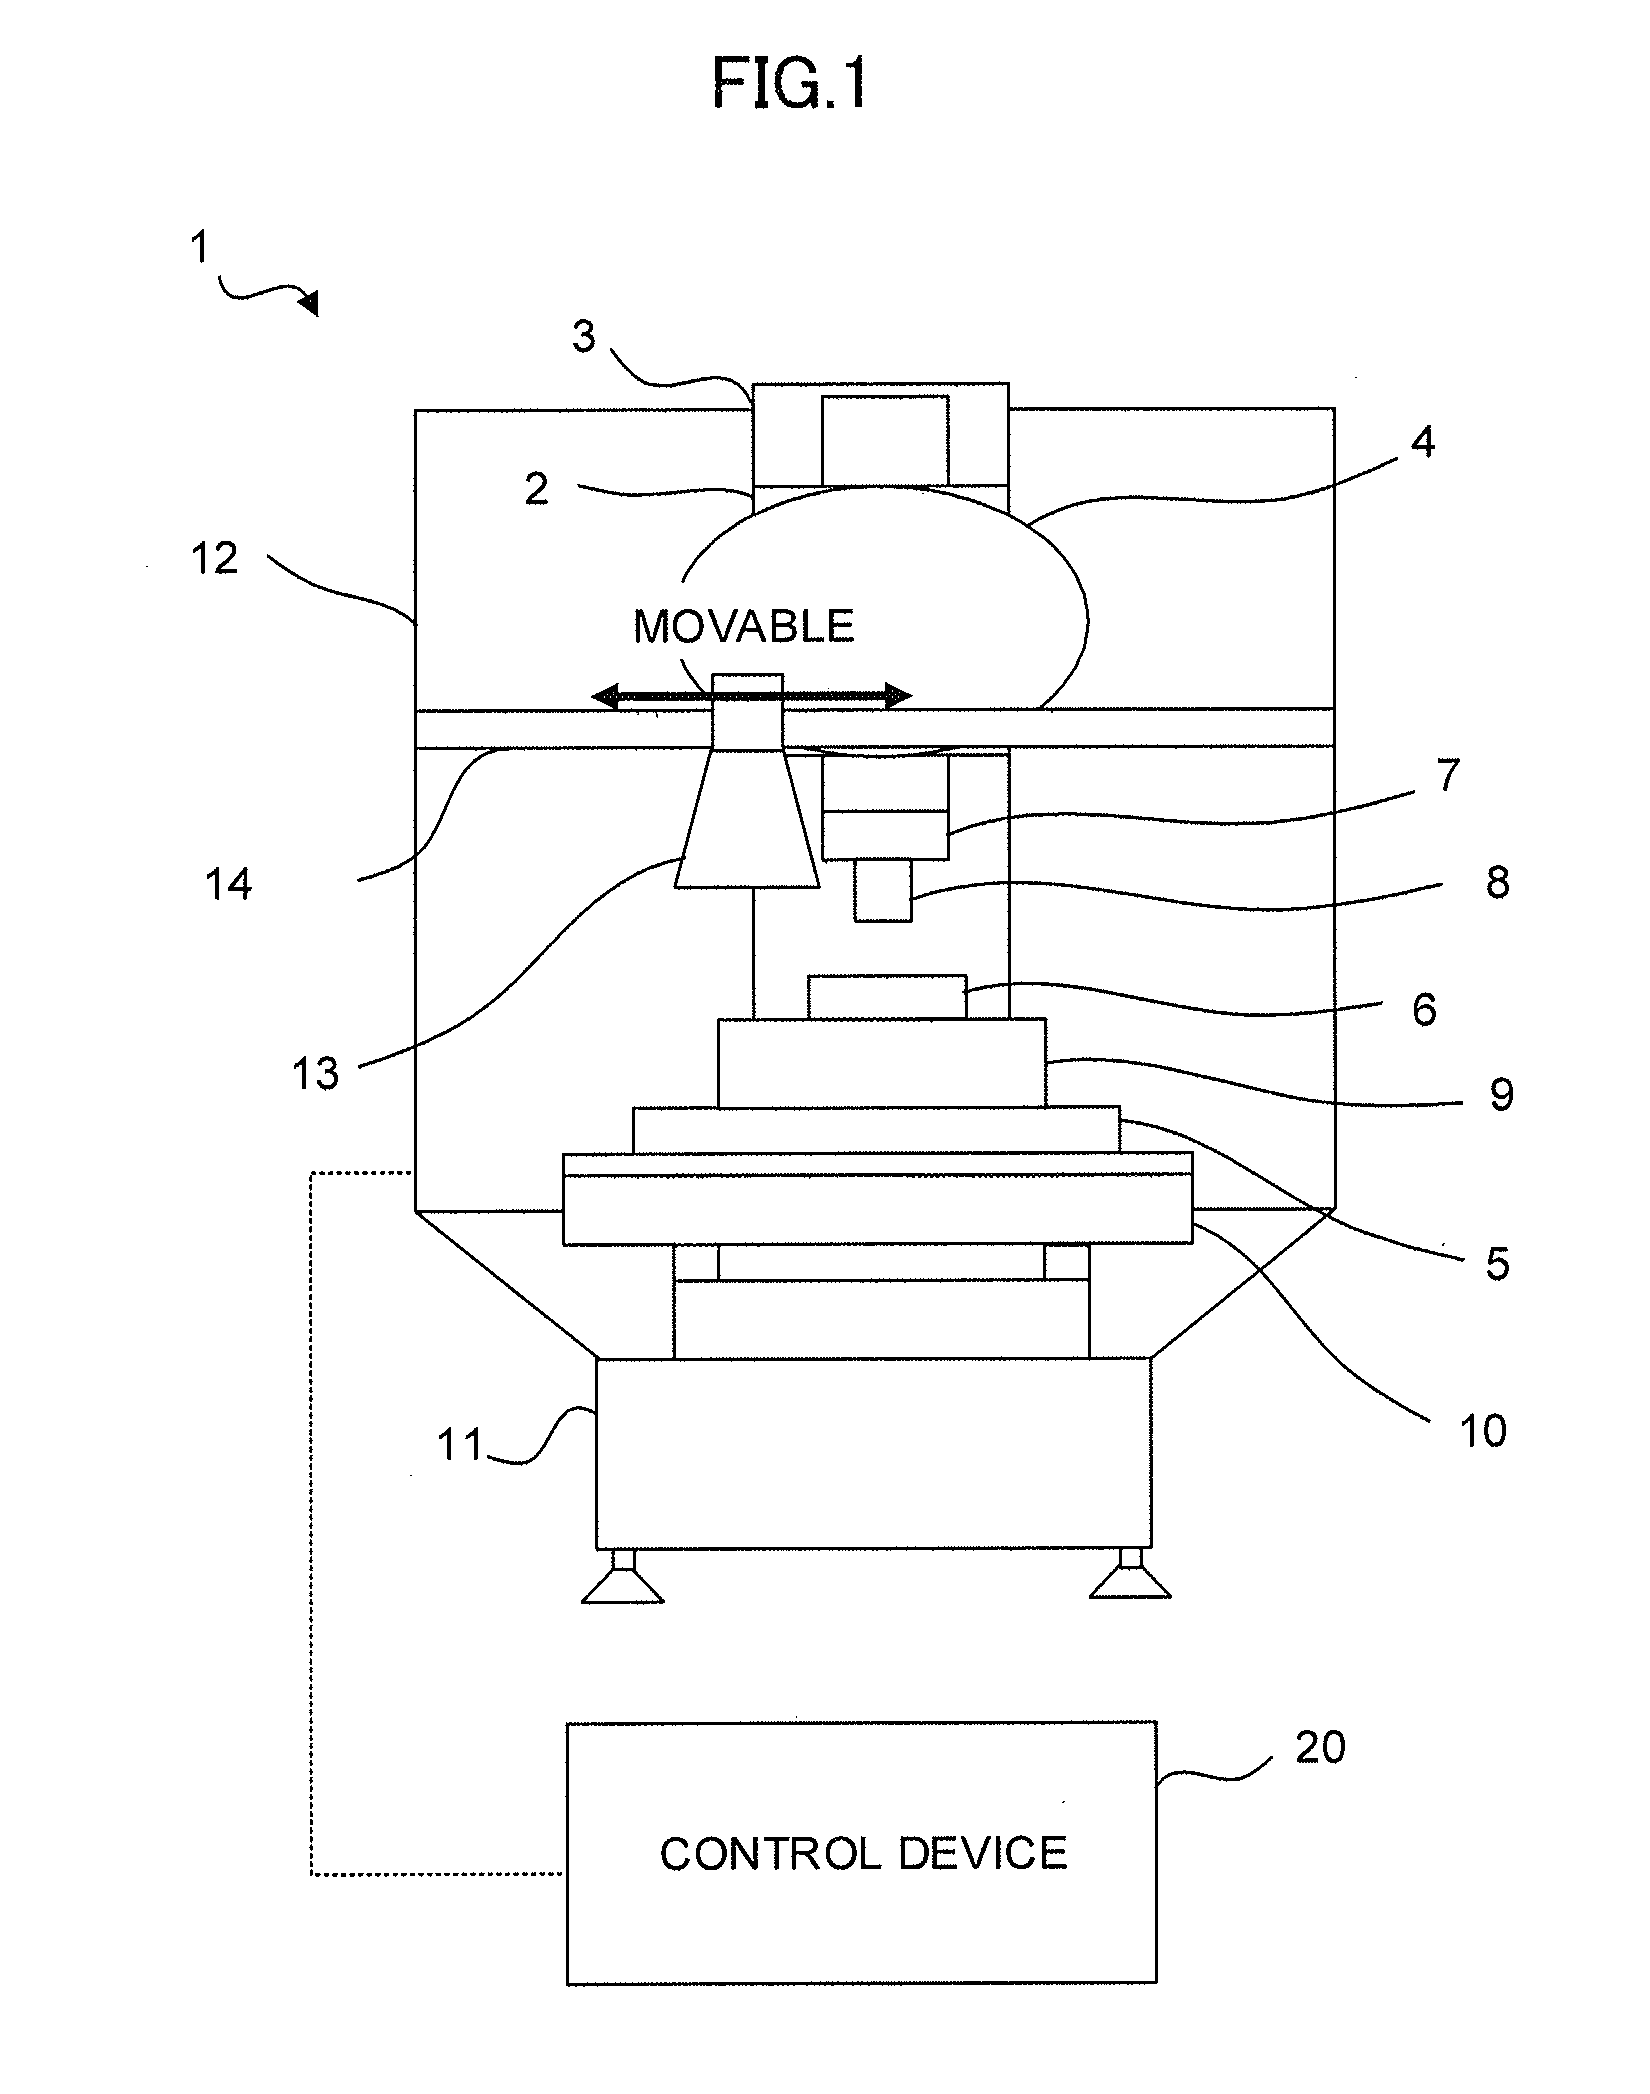 Processing machine including electric discharger